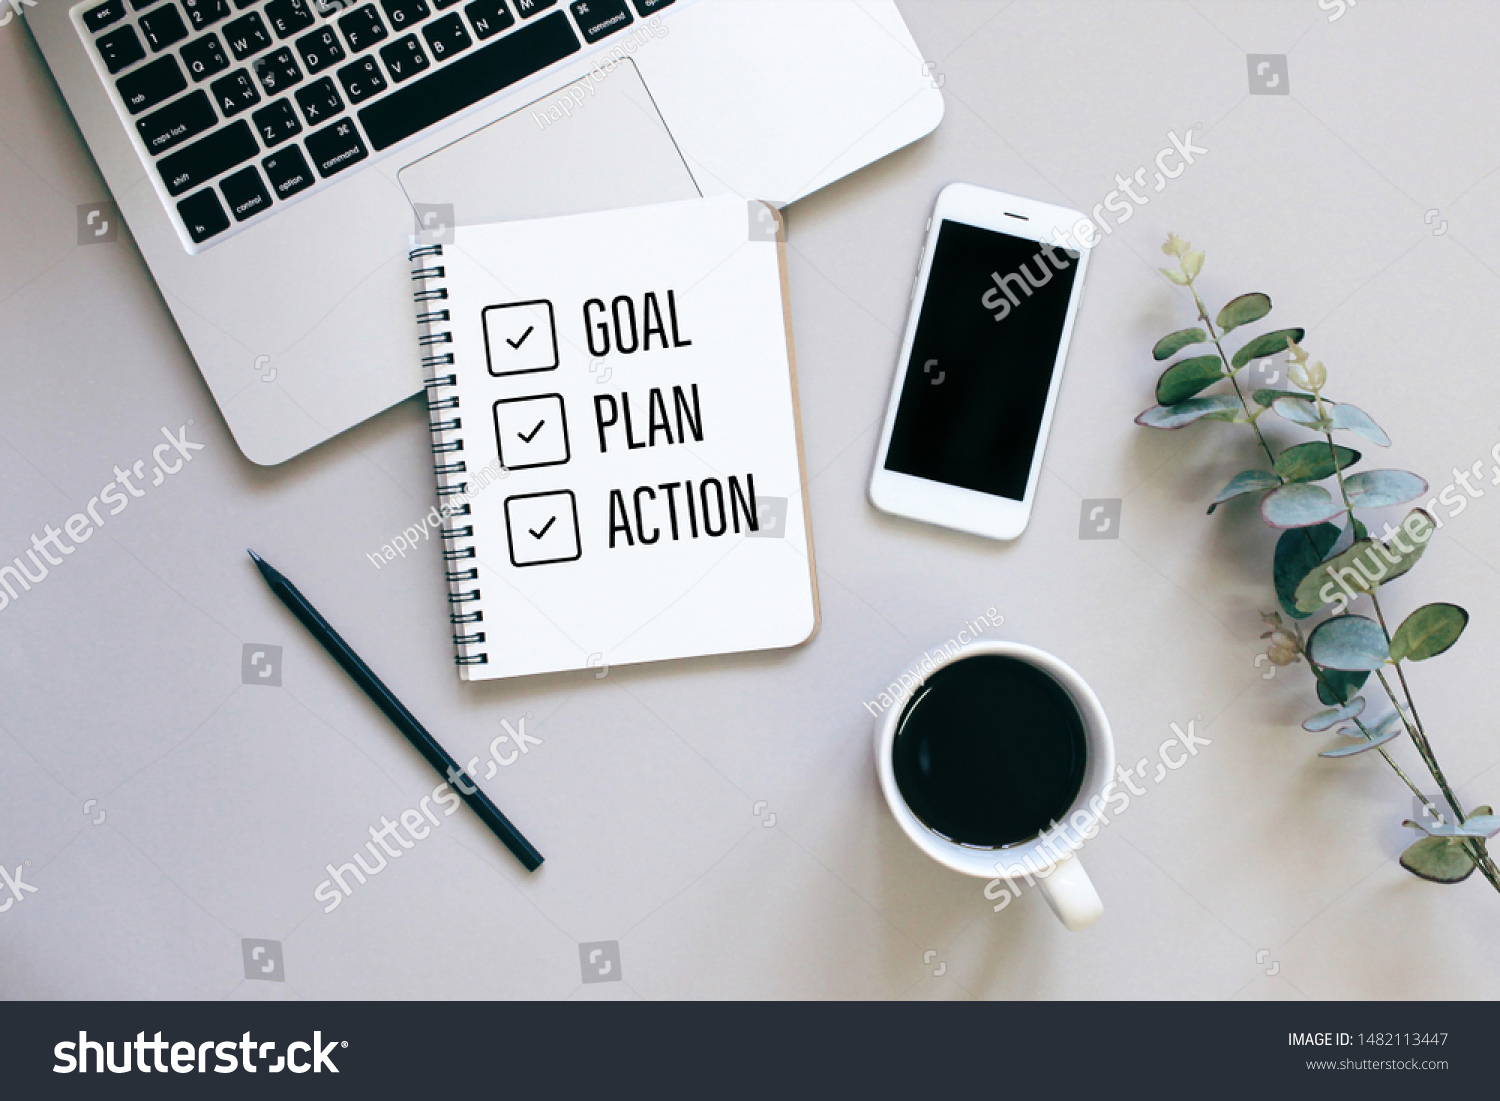 Goal, plan and action for 2020 on flat lay photo of workspace desk with smartphone, coffee, laptop and notebook with copy space background, minimal style and mockup concept  #1482113447